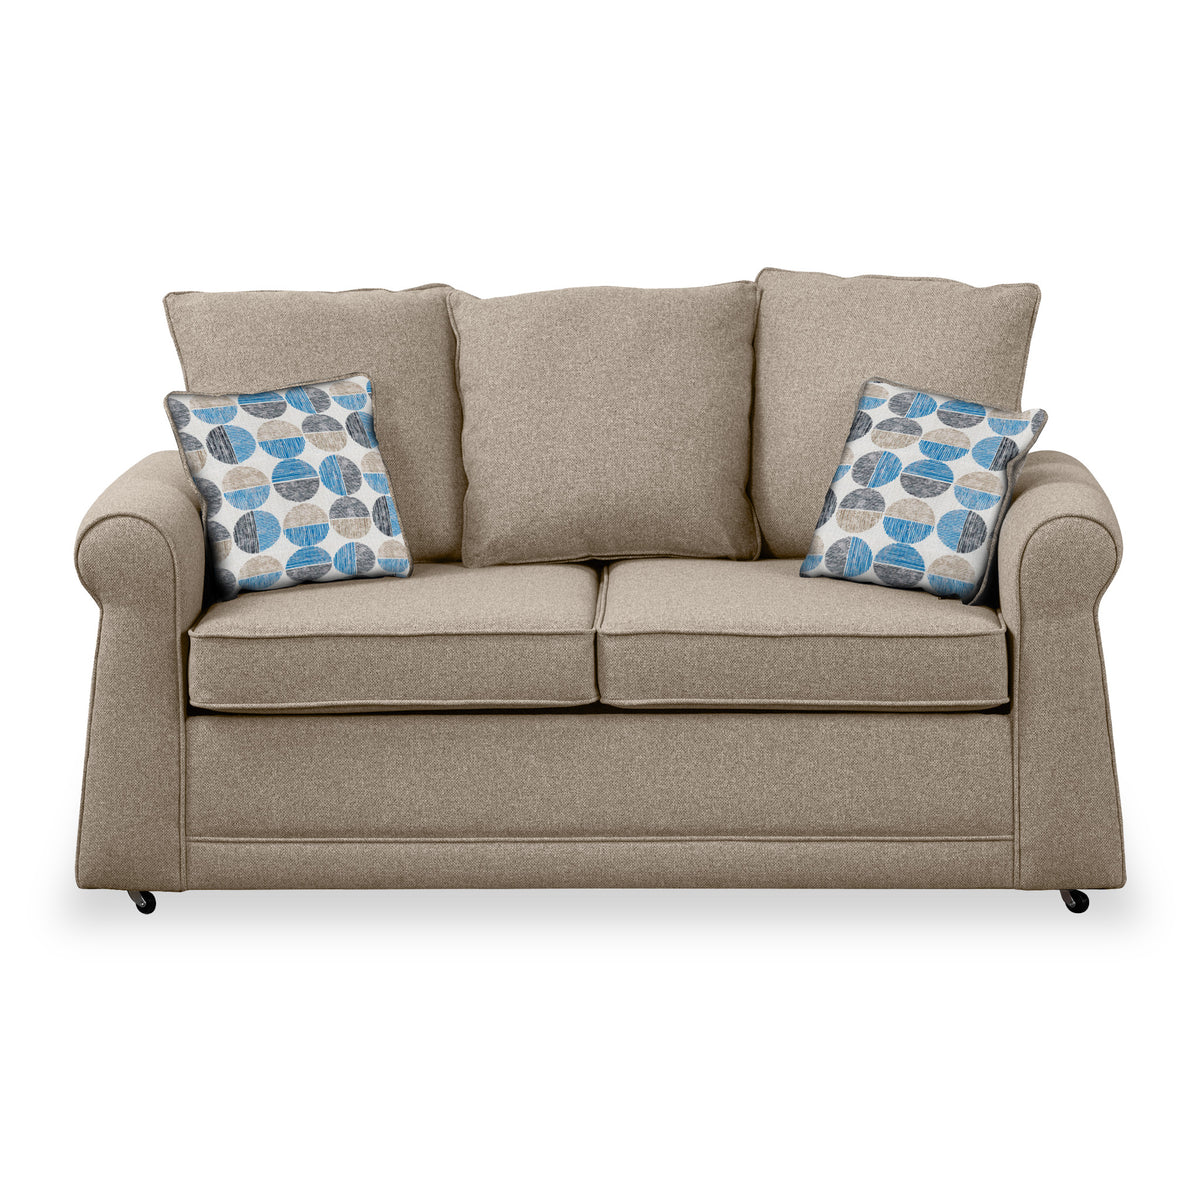 Broughton Oatmeal Faux Linen 2 Seater Sofabed with Blue Scatter Cushions from Roseland Furniture